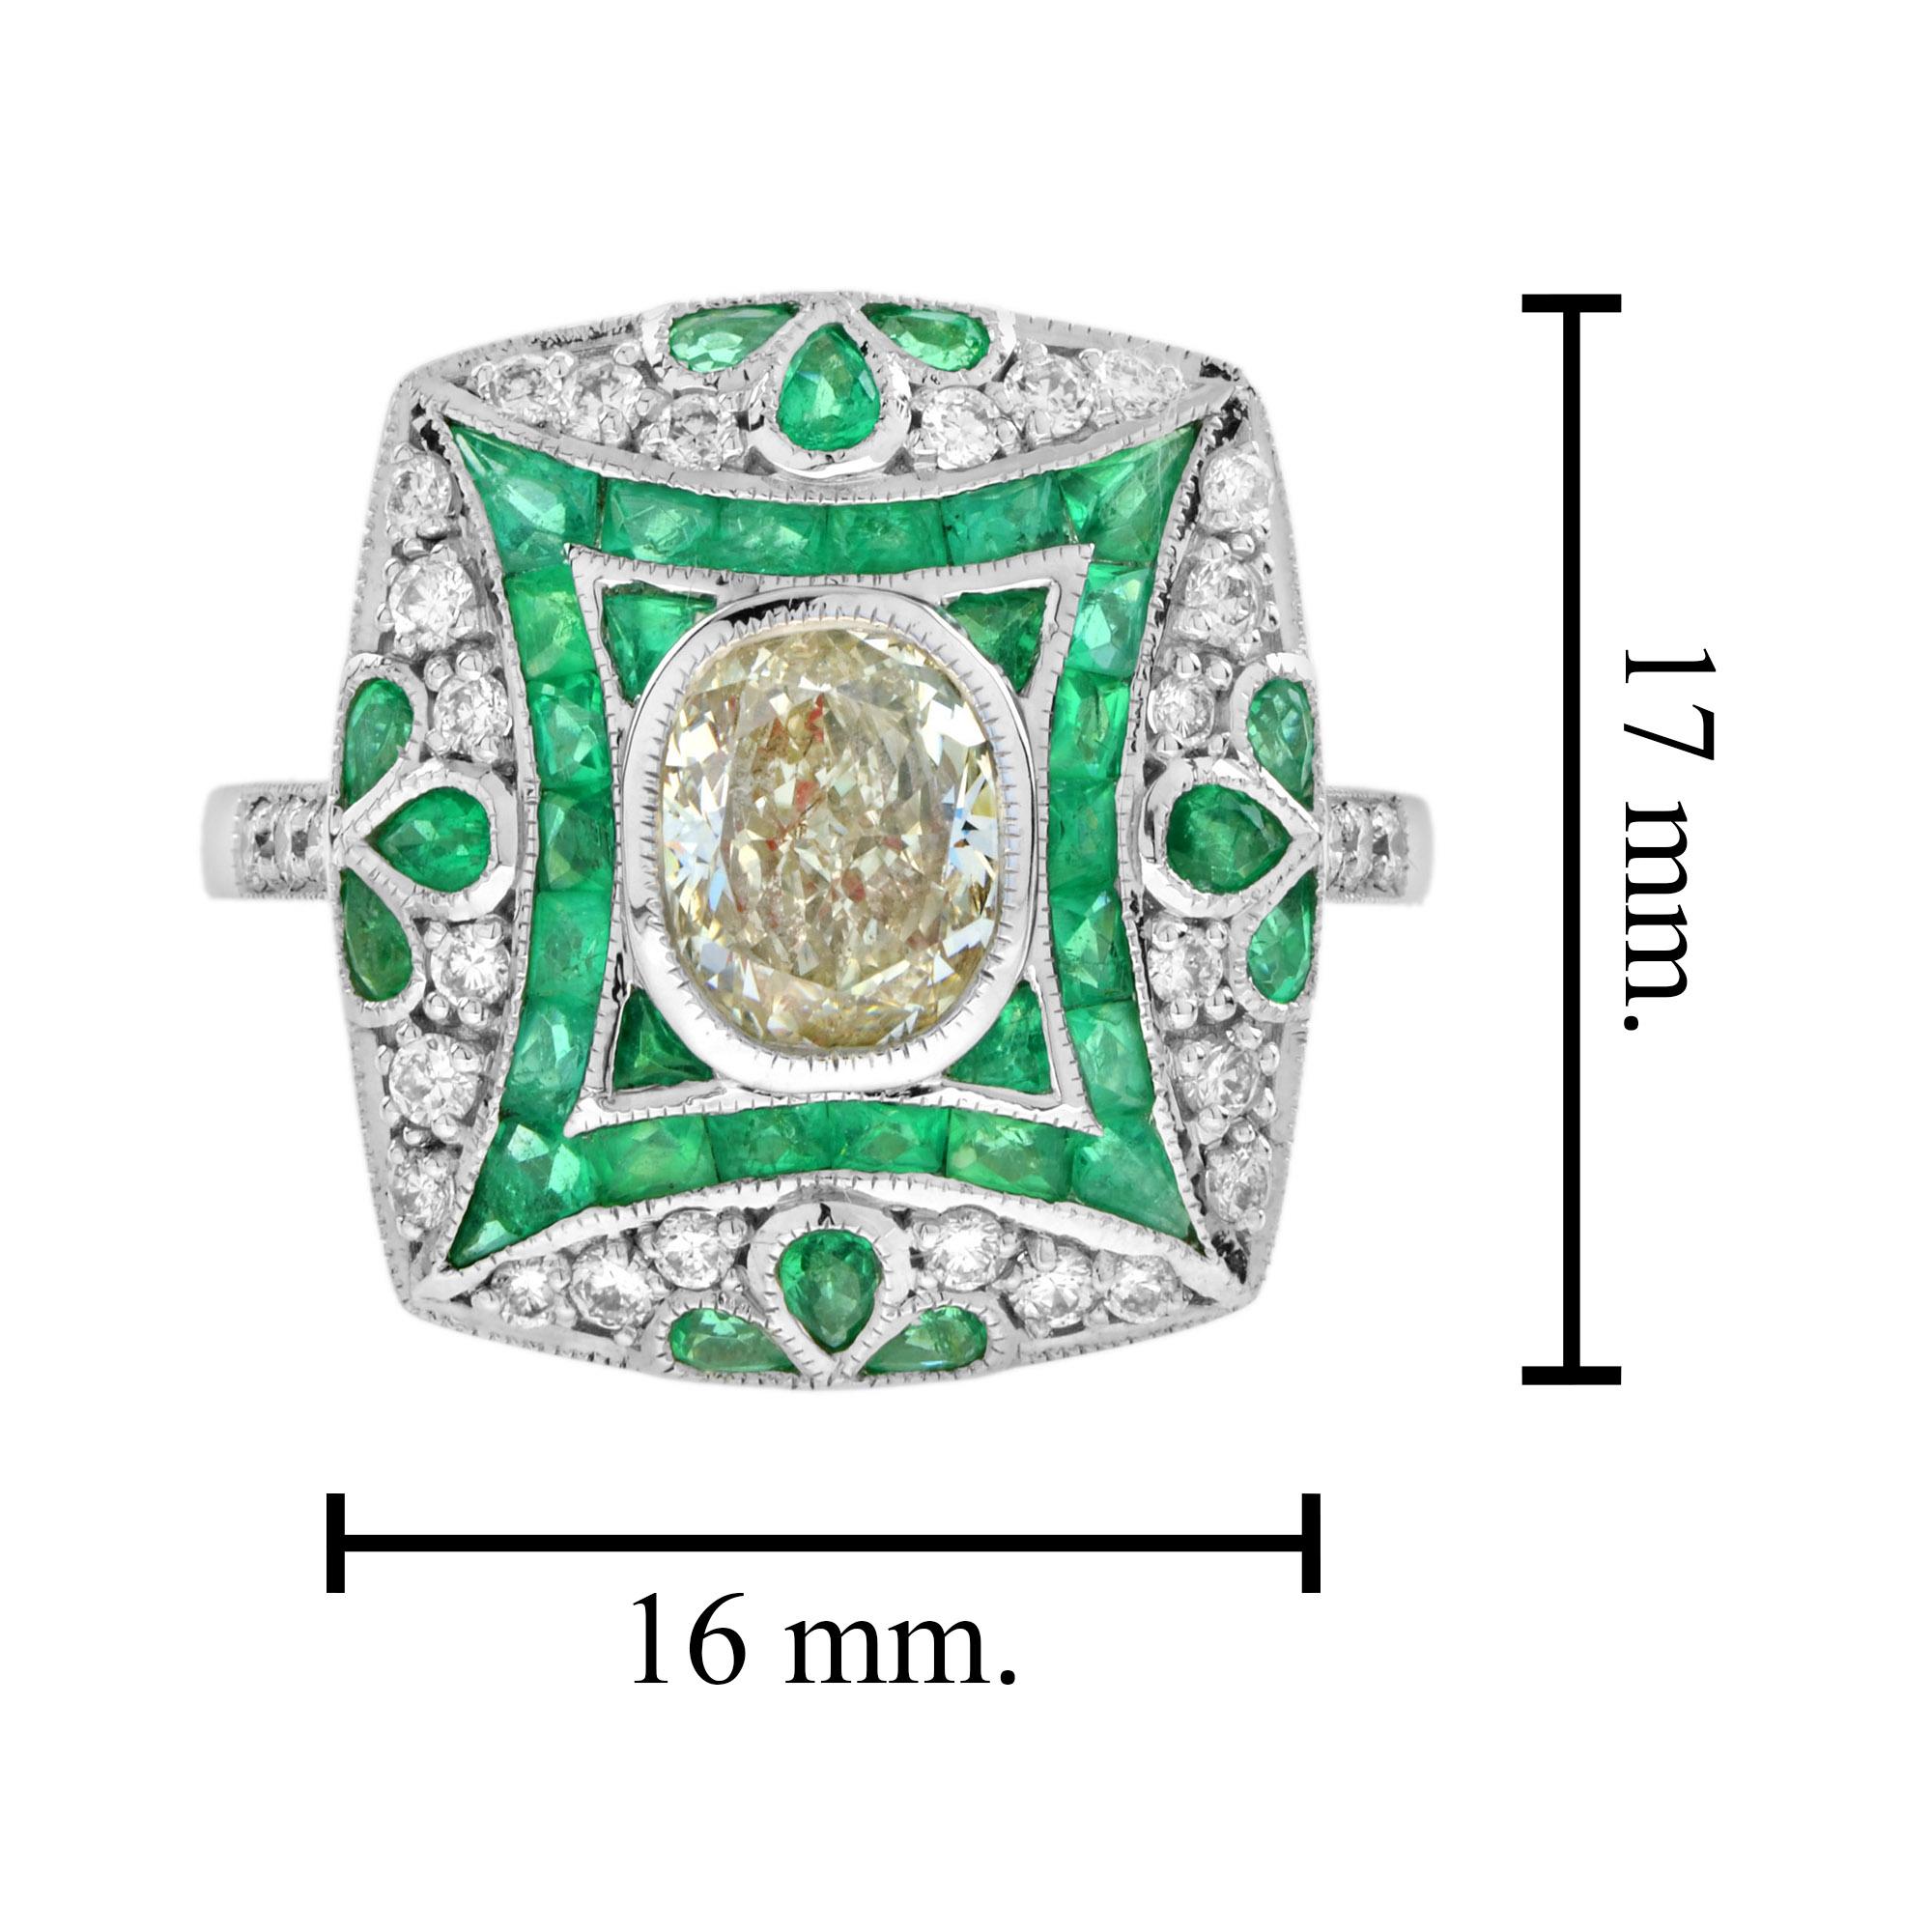 Certified Diamond and Emerald Art Deco Style Engagement Ring in 18k White Gold For Sale 2